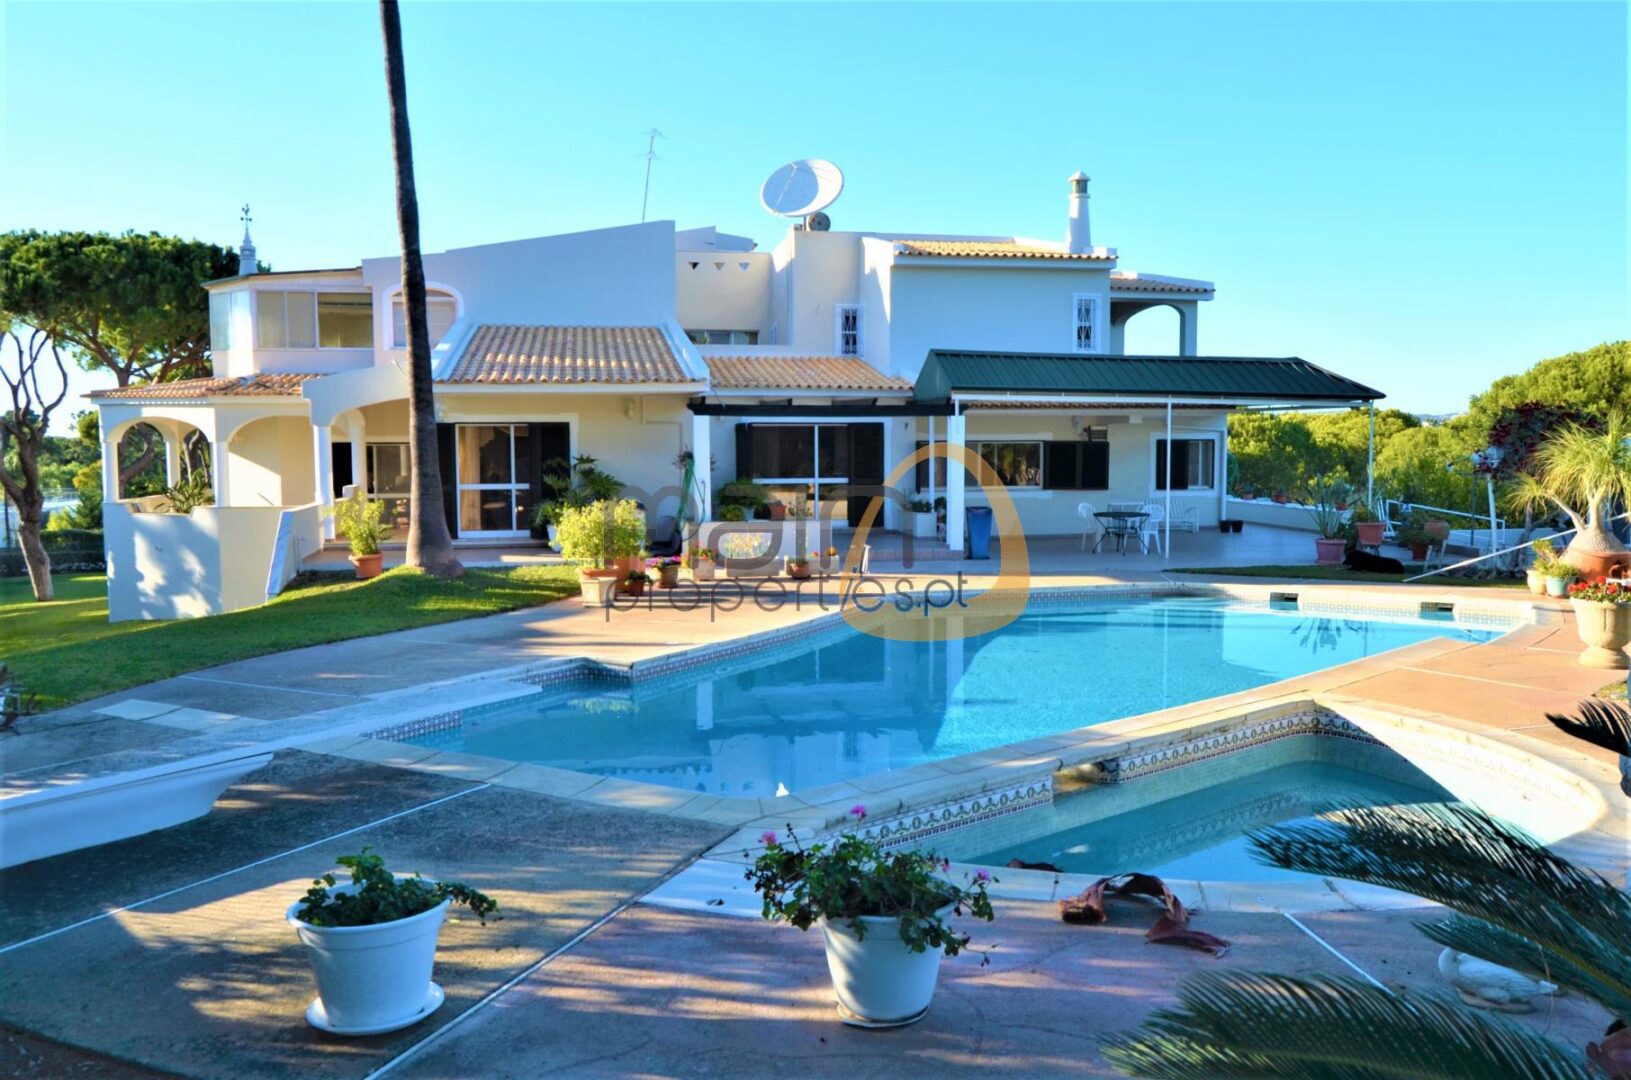 Detached villa with 7 bedrooms and private pool in a quiet area of Vilamoura